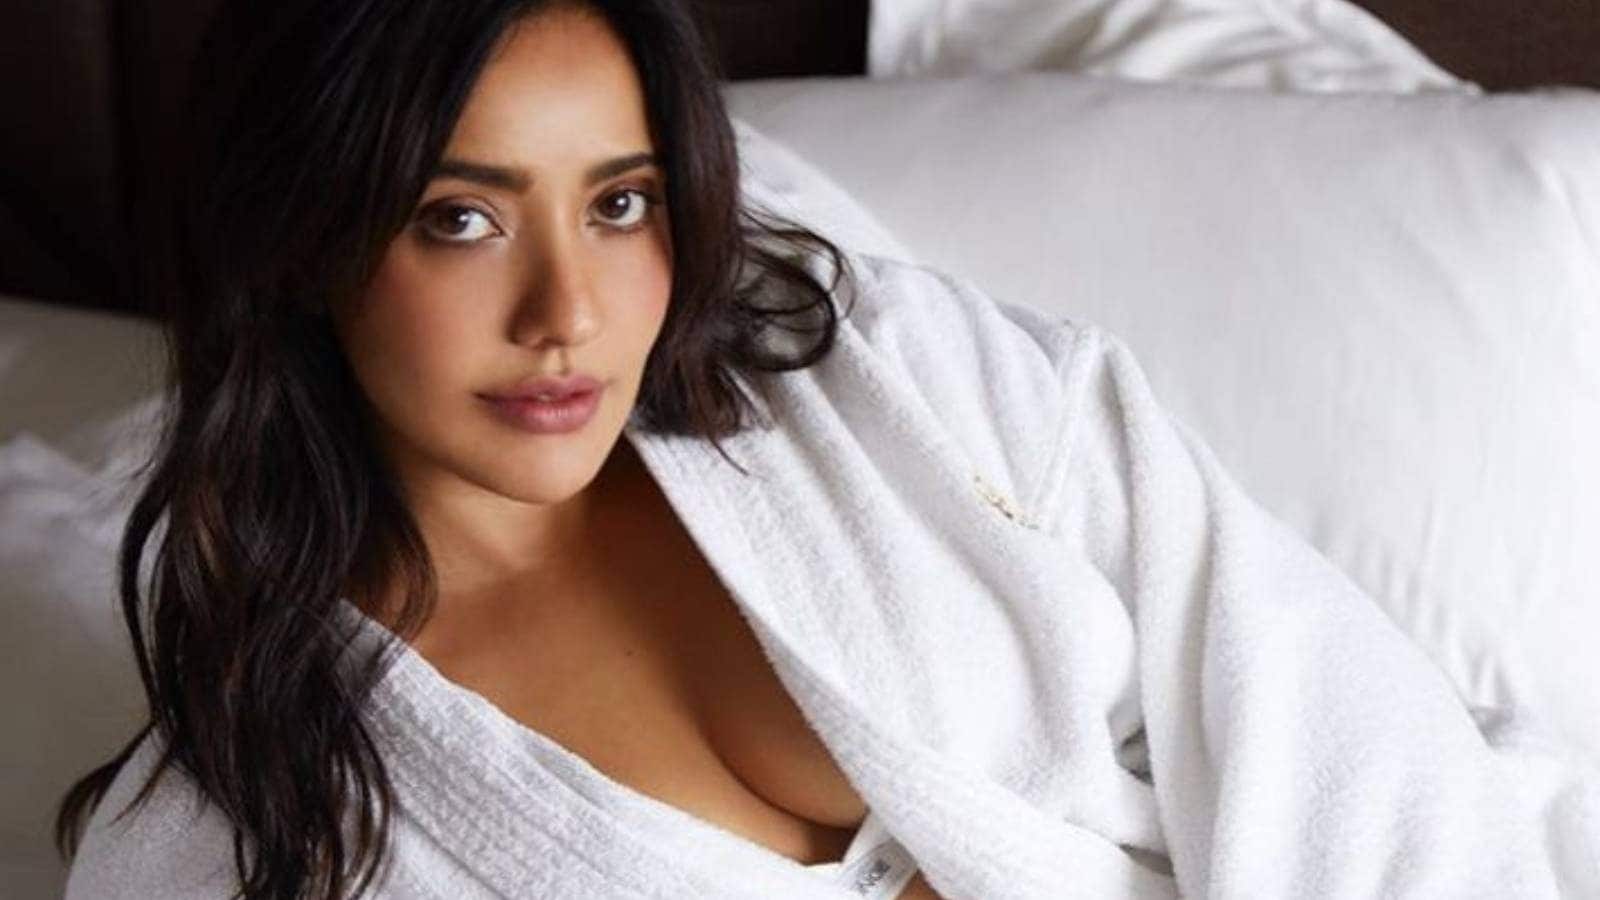 Neha Sharma Teases Fans With Sexy Photos In White Lingerie And Bathrobe, Check Out The Divas Sultry Pictures pic